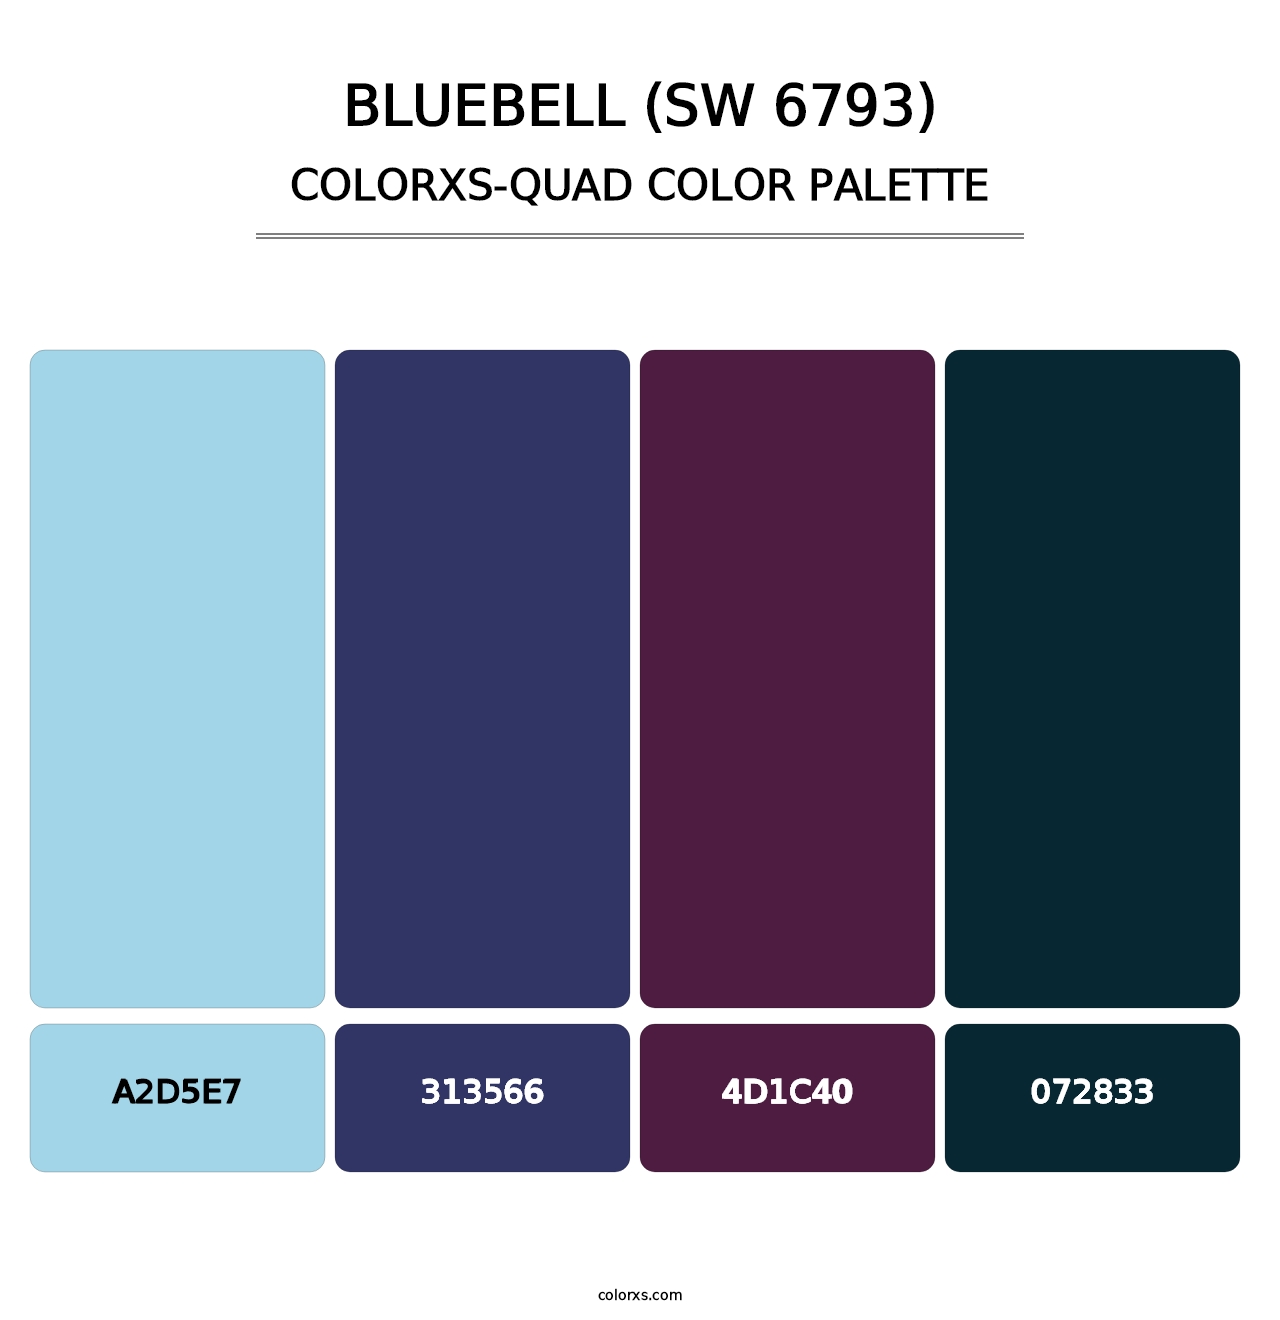 Bluebell (SW 6793) - Colorxs Quad Palette